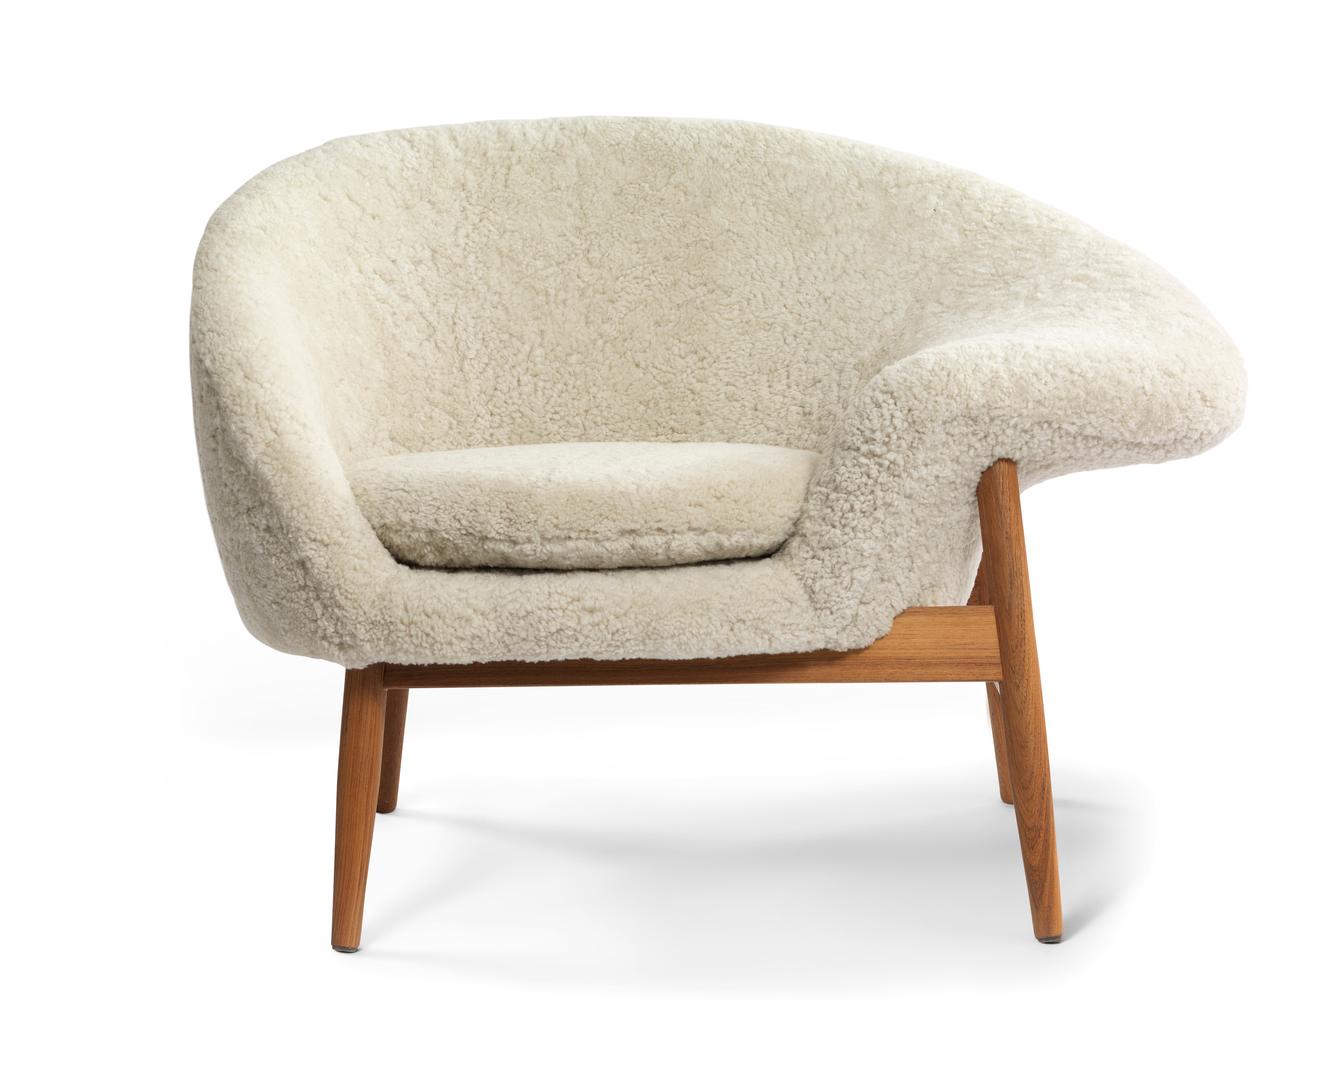 Fried egg right lounge chair sheepskin moonlight by Warm Nordic
Dimensions: D99 x W68 x H 68 cm
Material: Sheepskin,Textile or nubuck upholstery, Solid oiled teak
Weight: 25 kg
Also available in different colours and finishes. 

A unique